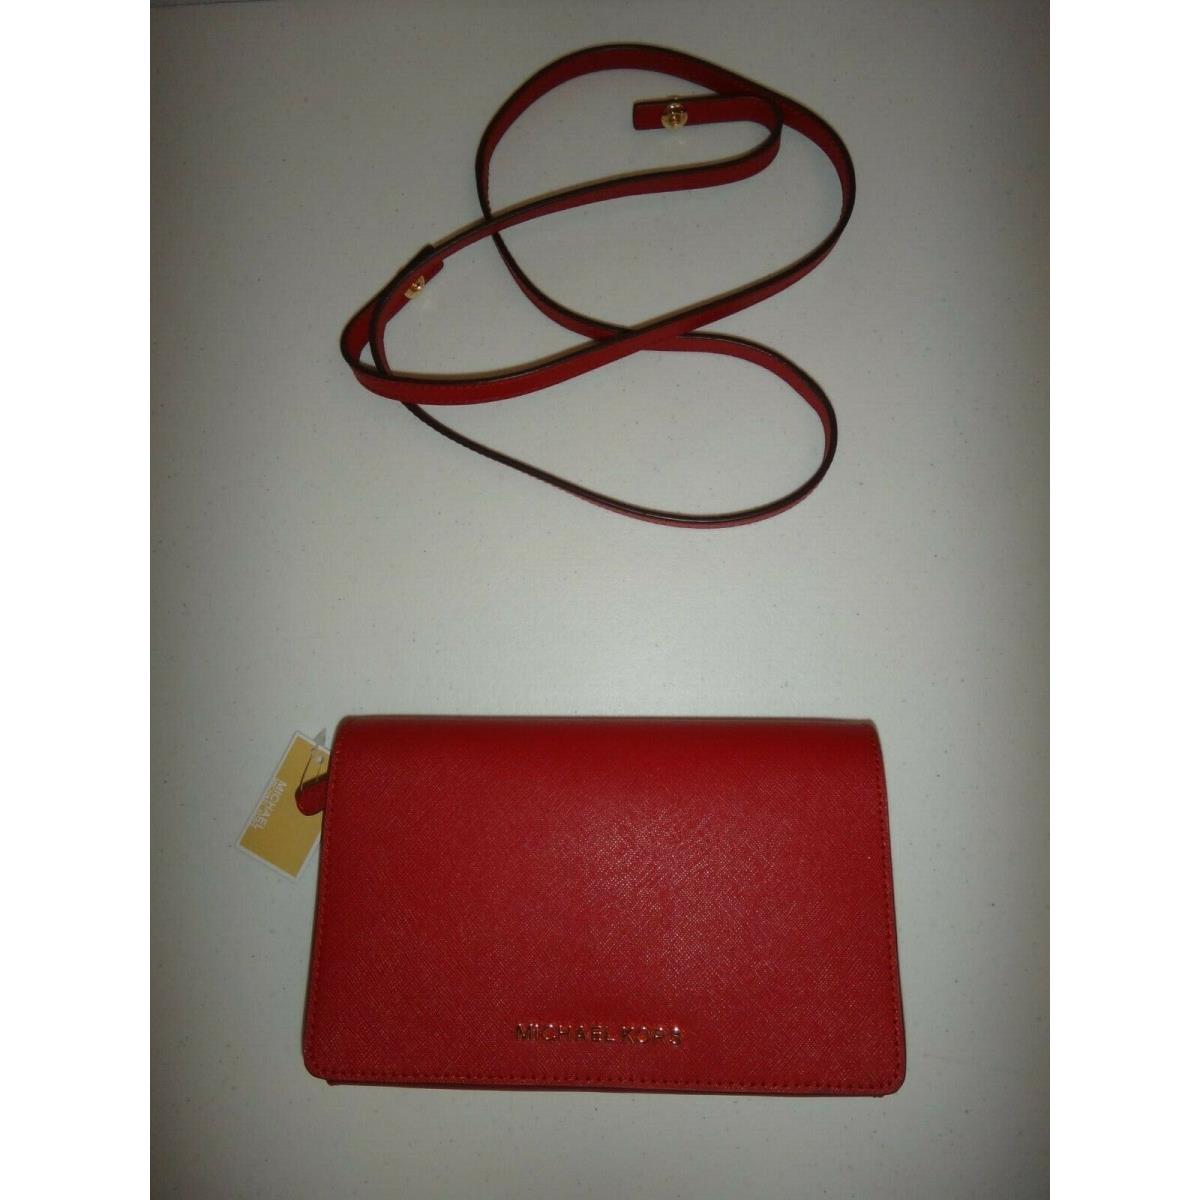 Michael Kors MK Convertible Cross-body Clutch Bag Wallet Red Saffiano Leather